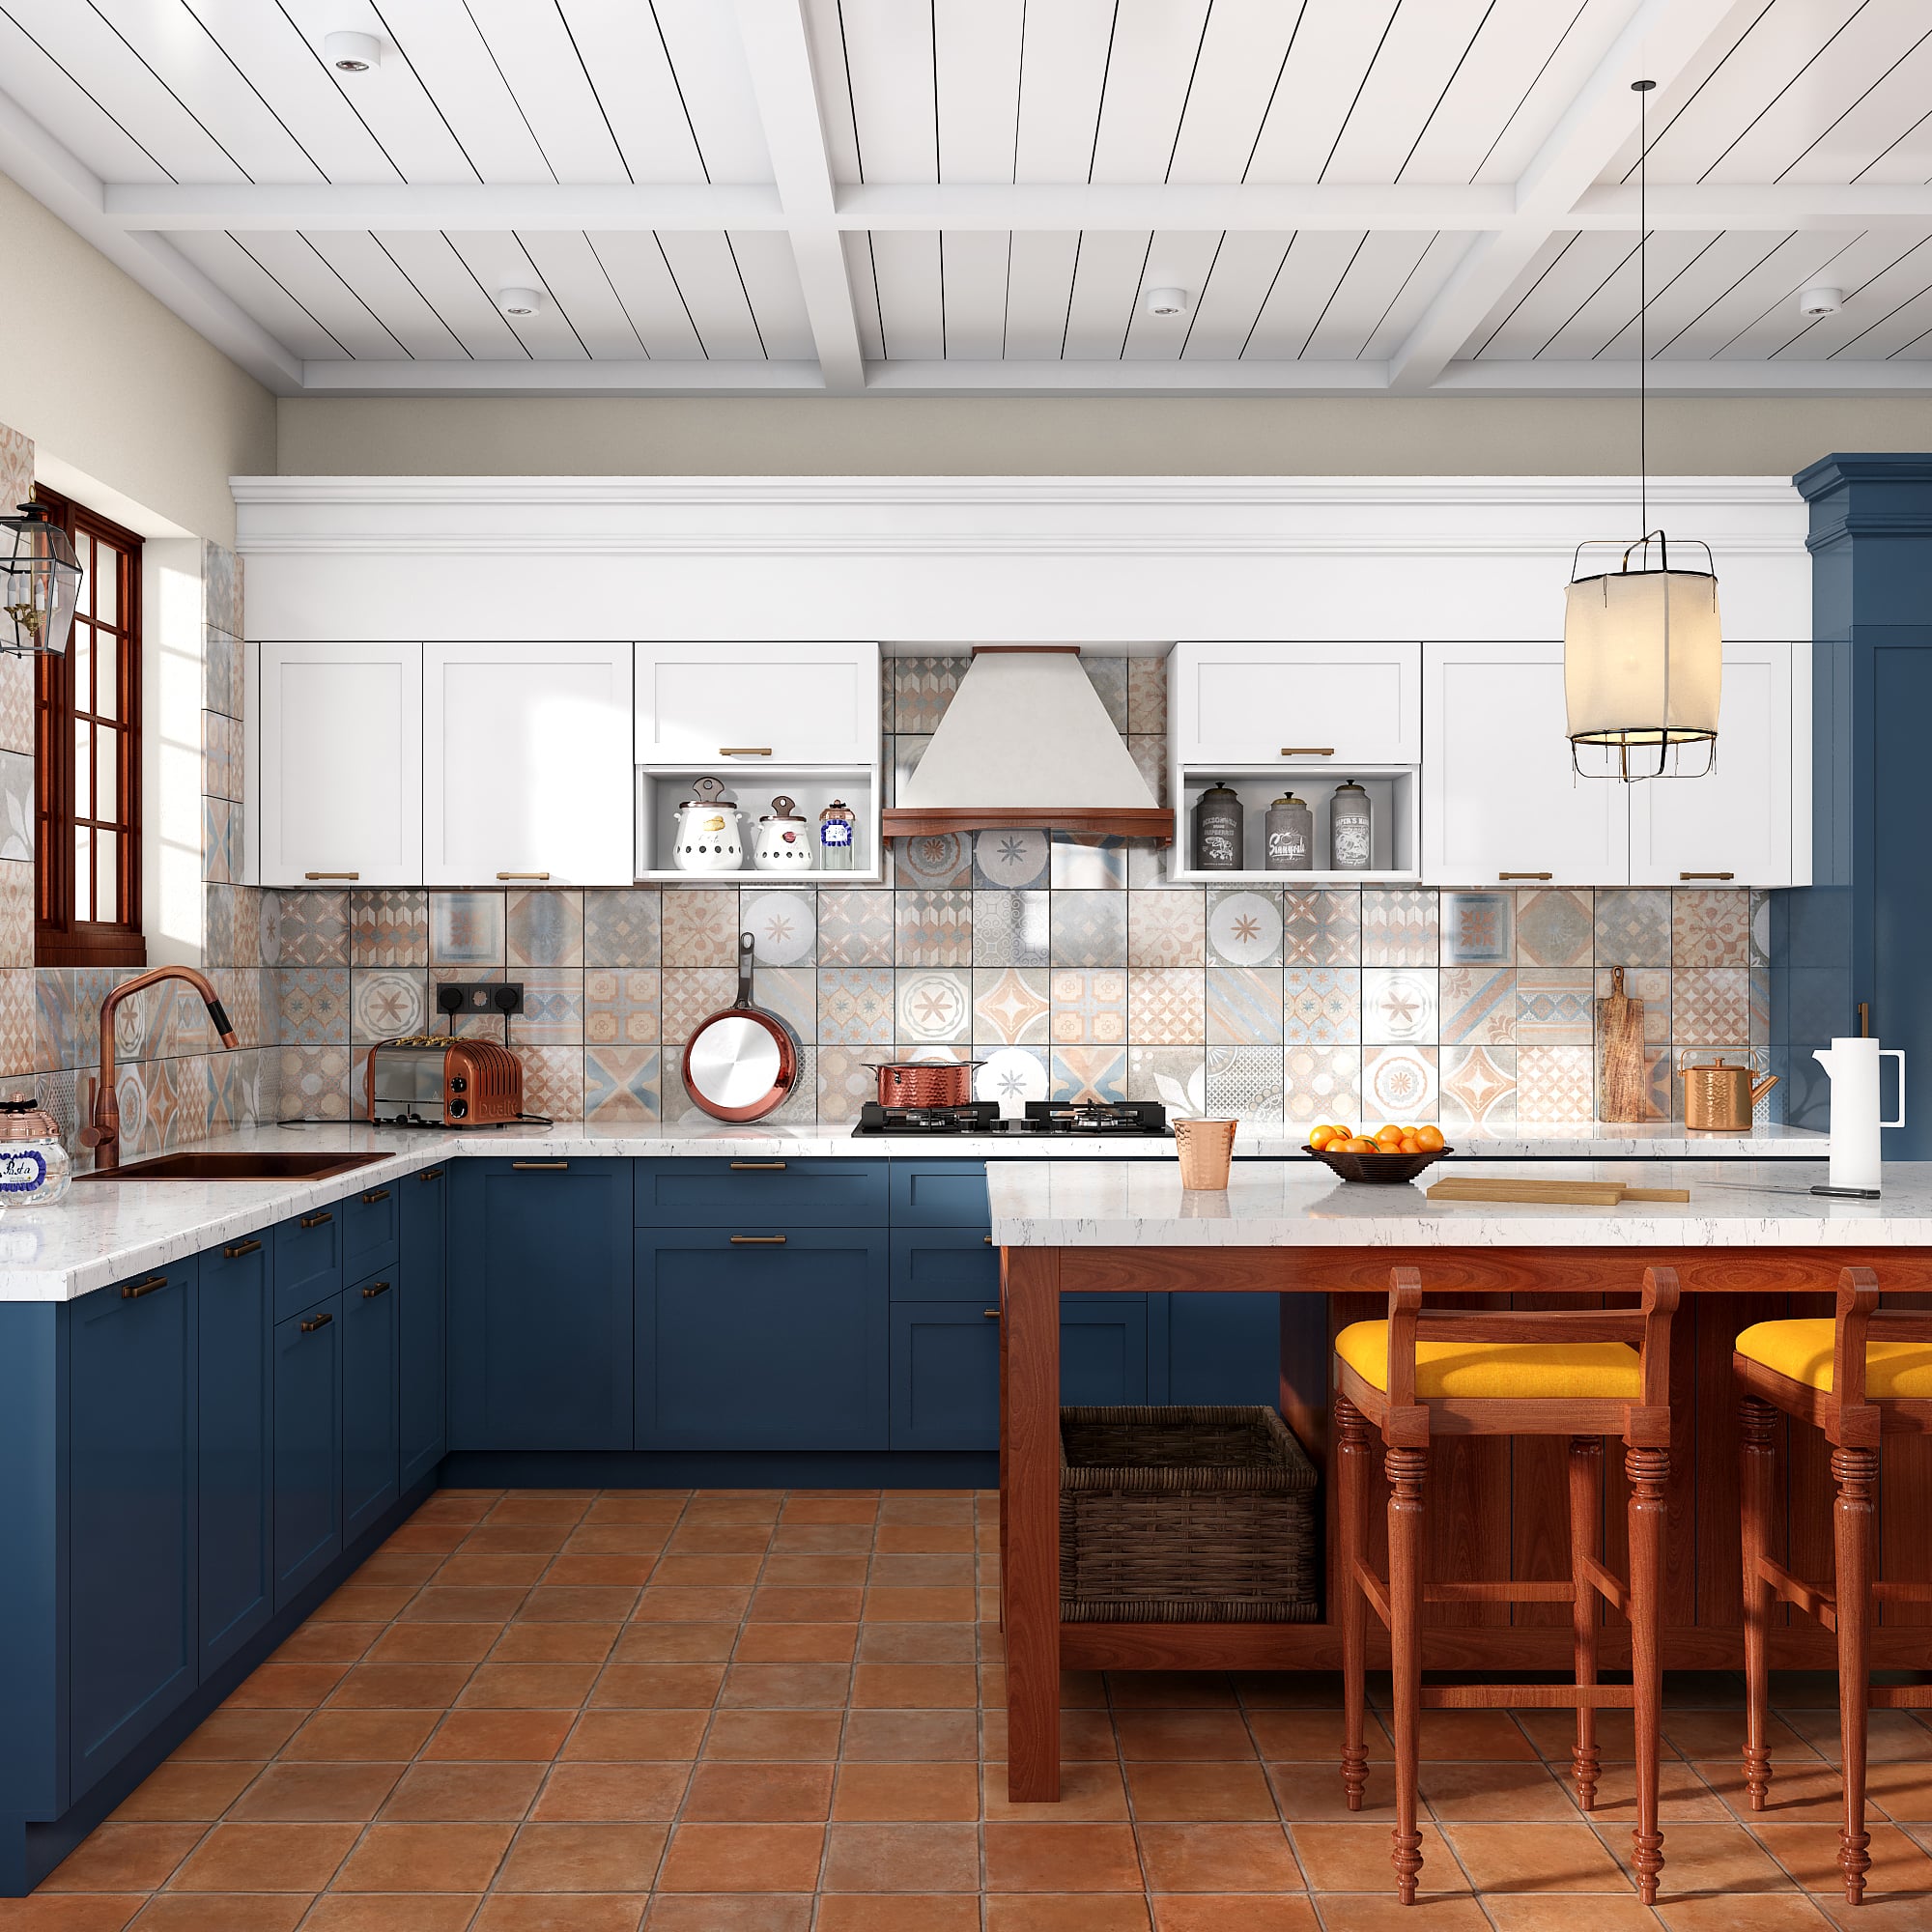 Chennai top interior designers made a dual toned kitchen